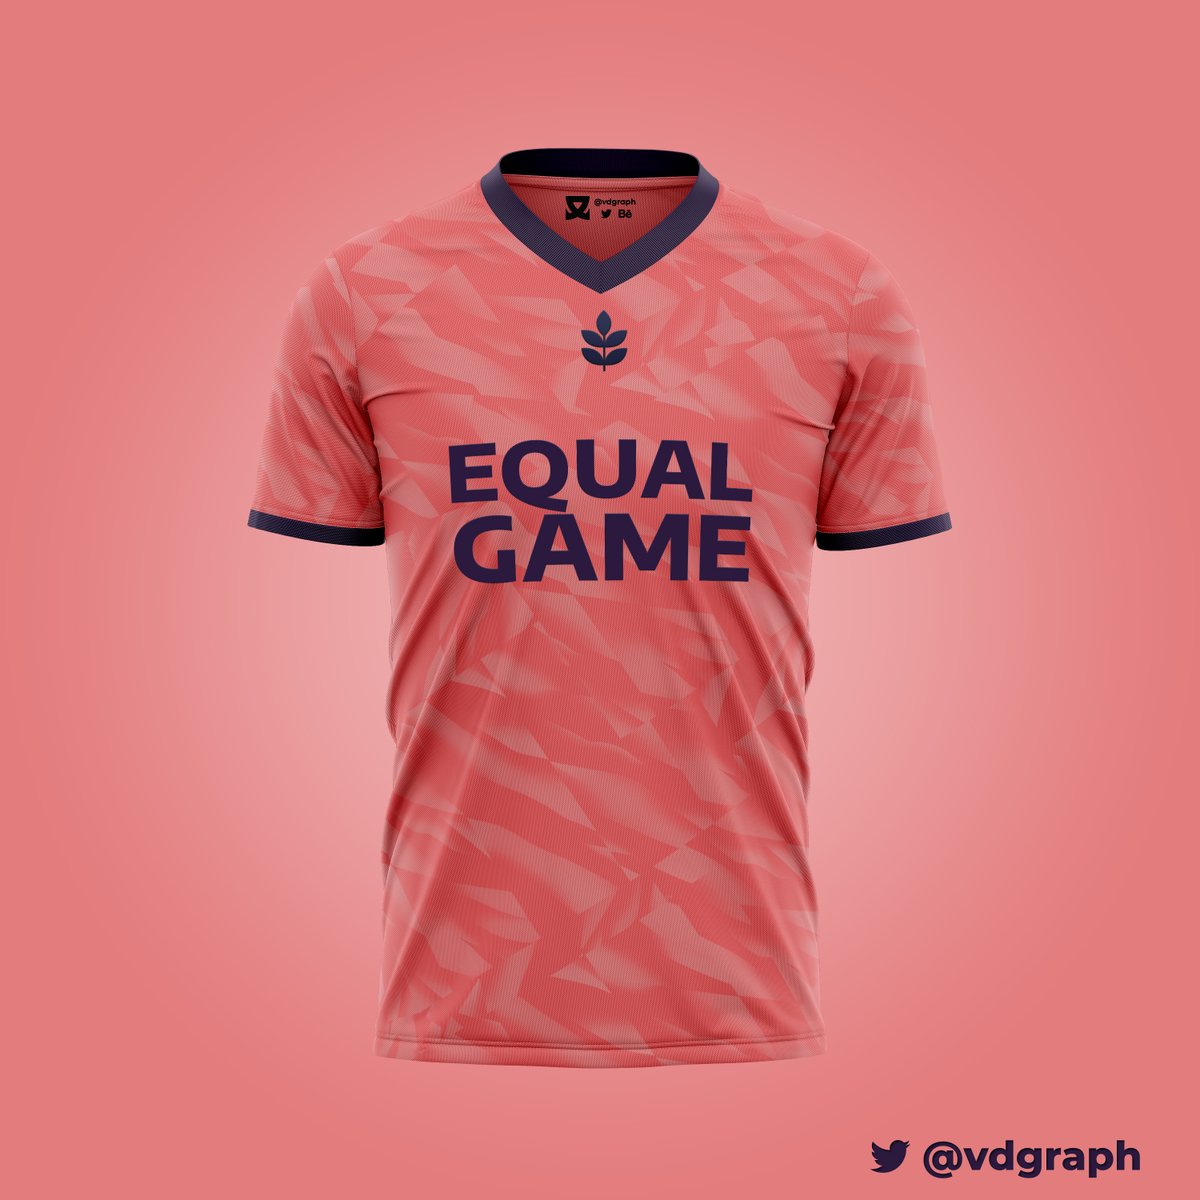 Equal Game (Concept Kit)
Inspired by Mary Earps, let's keep pushing for an #EqualGame
Follow @vdgraph for more! 🔔